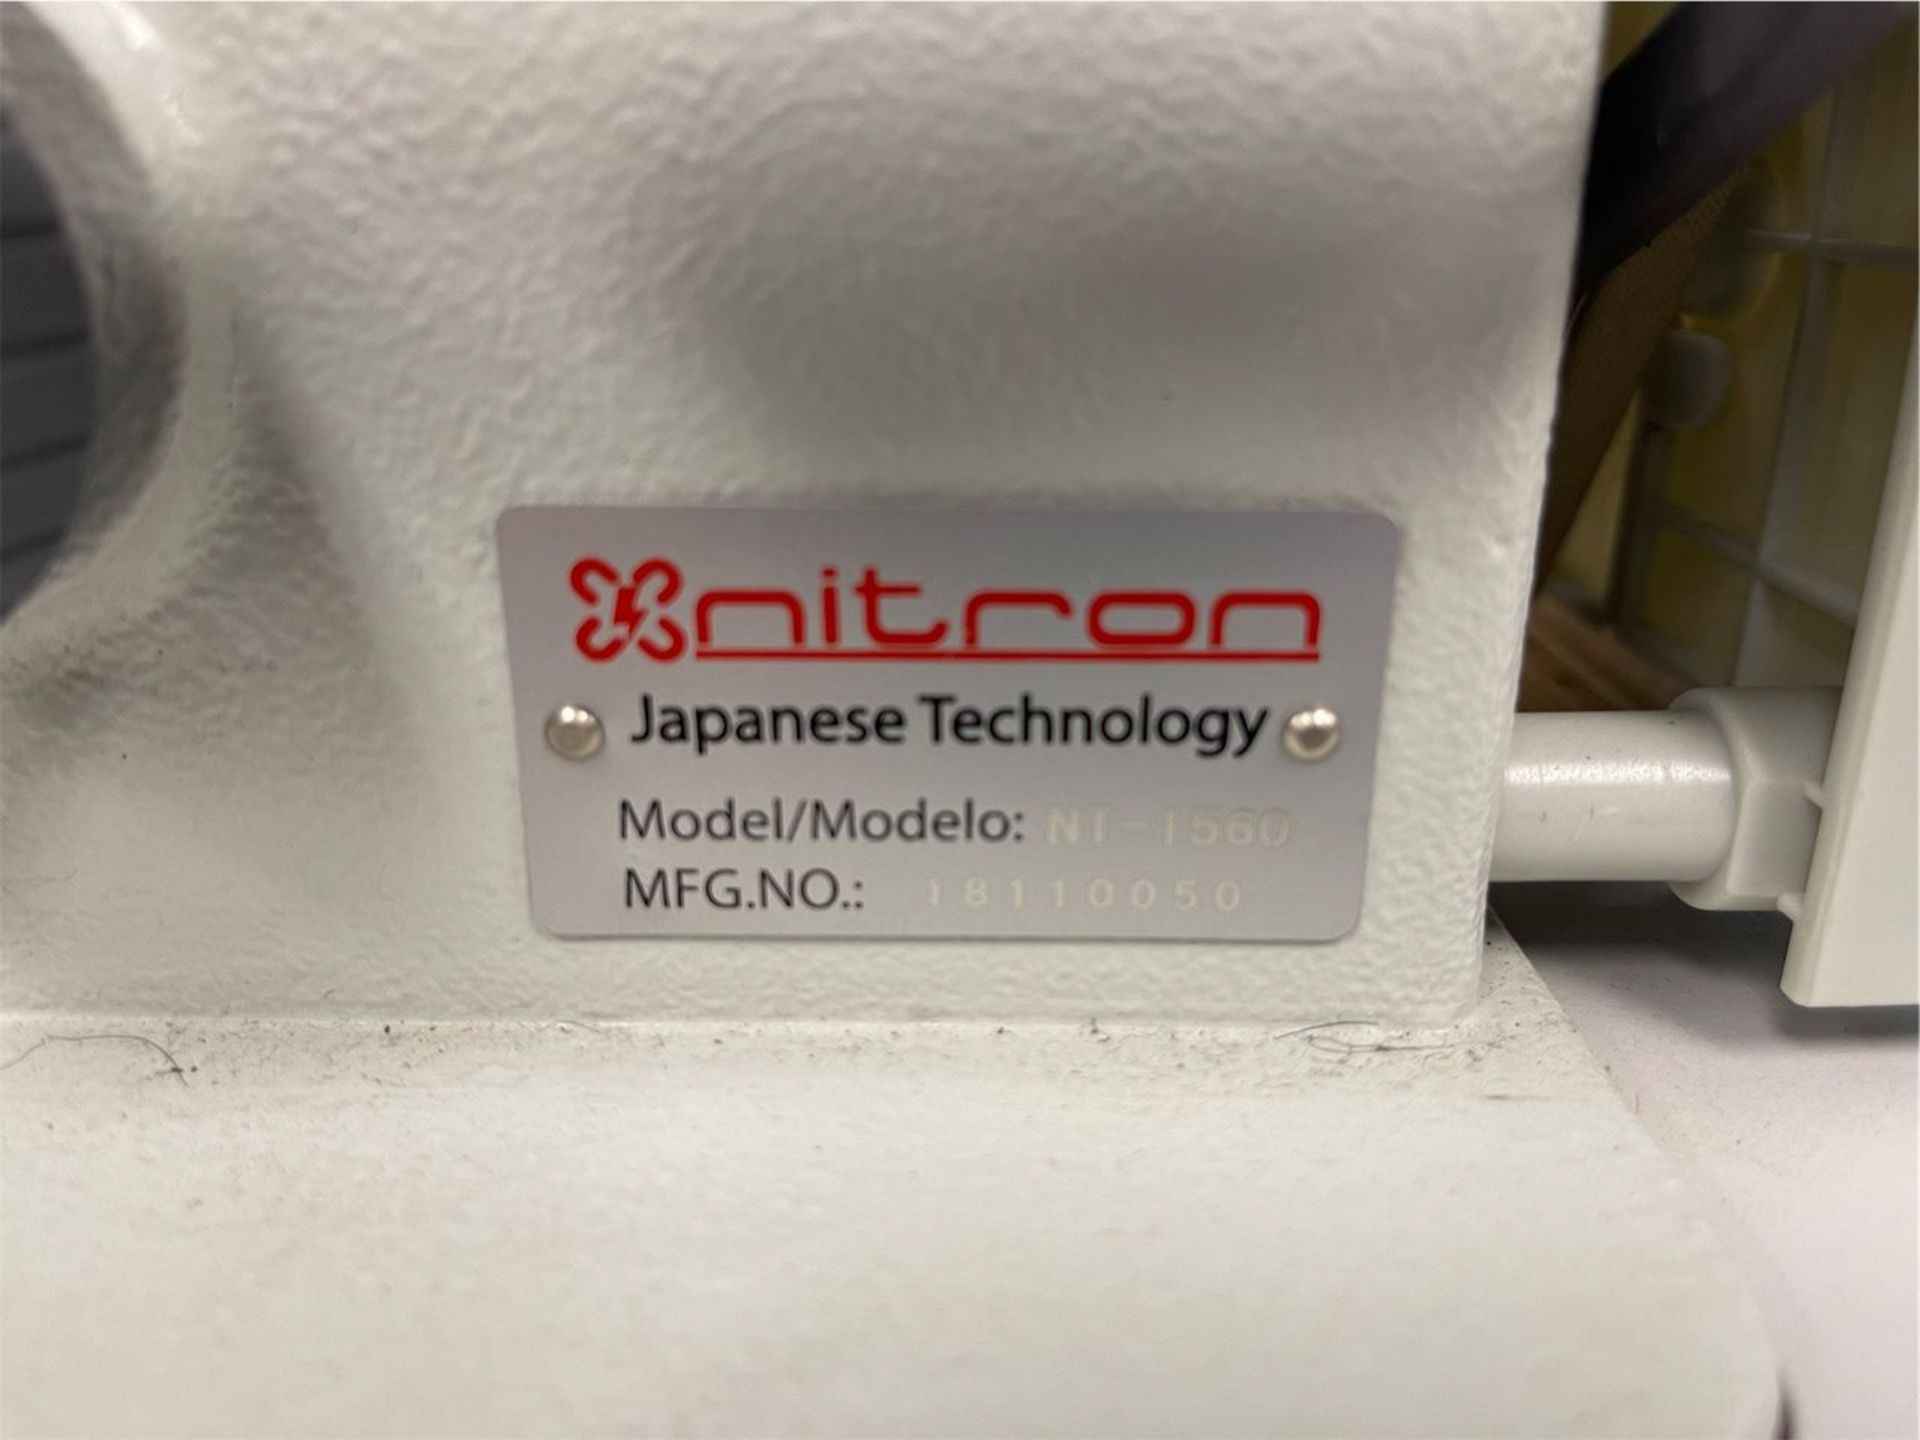 Nitron-Geling Model NT-1560 Double Needle Automatic Walking Foot Sewing Machine, S/N: 18110050; with - Image 9 of 9